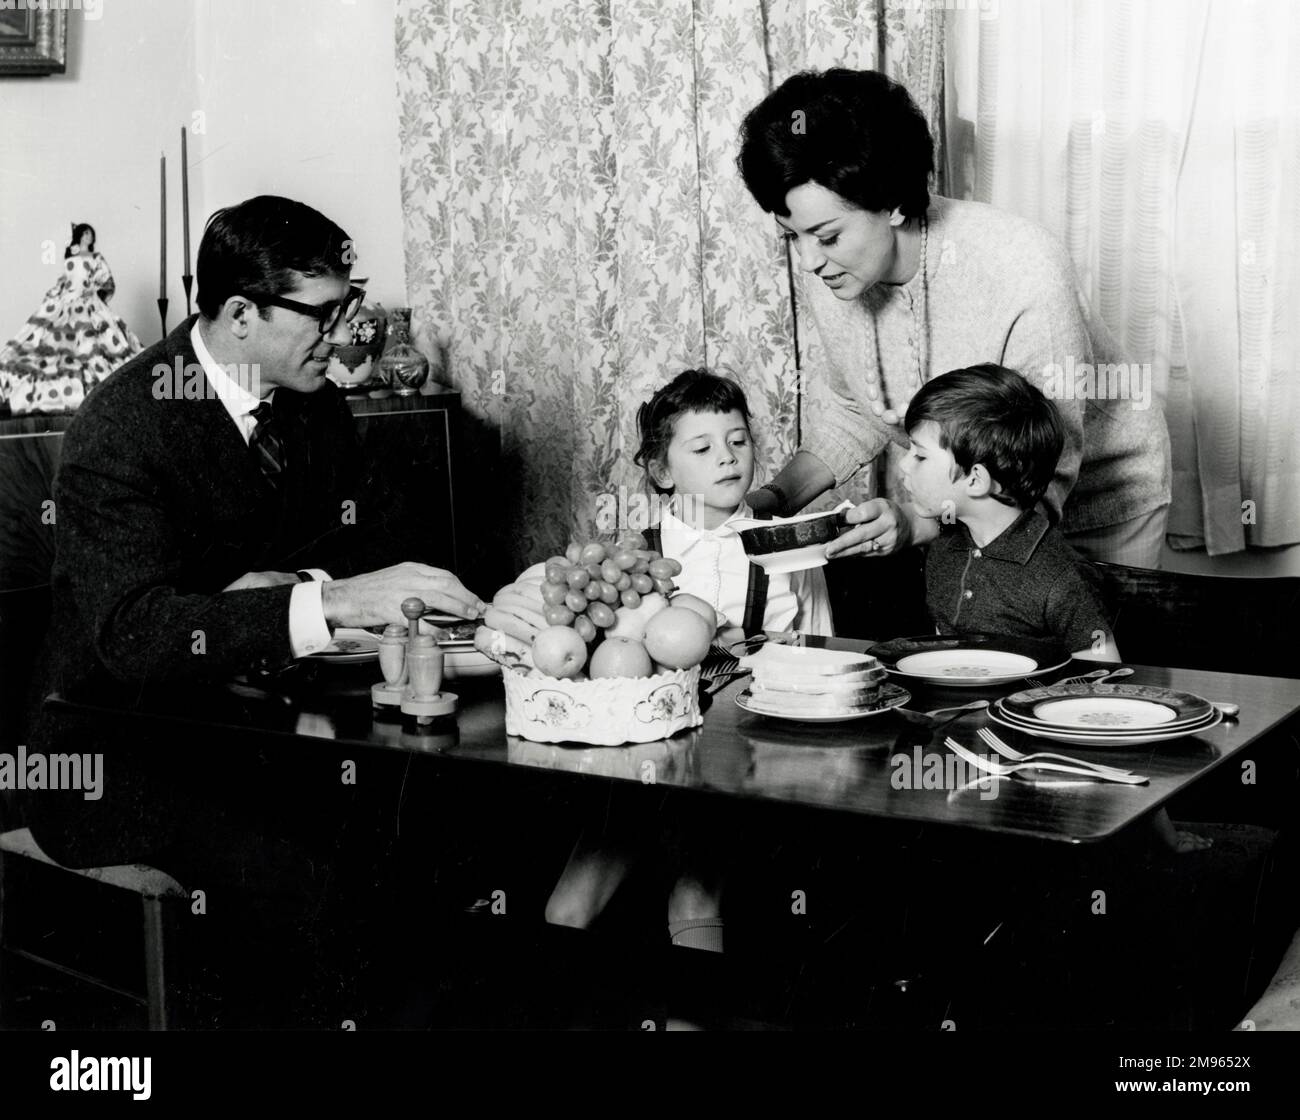 Mum serves up dinner to the rest of the family. Stock Photo